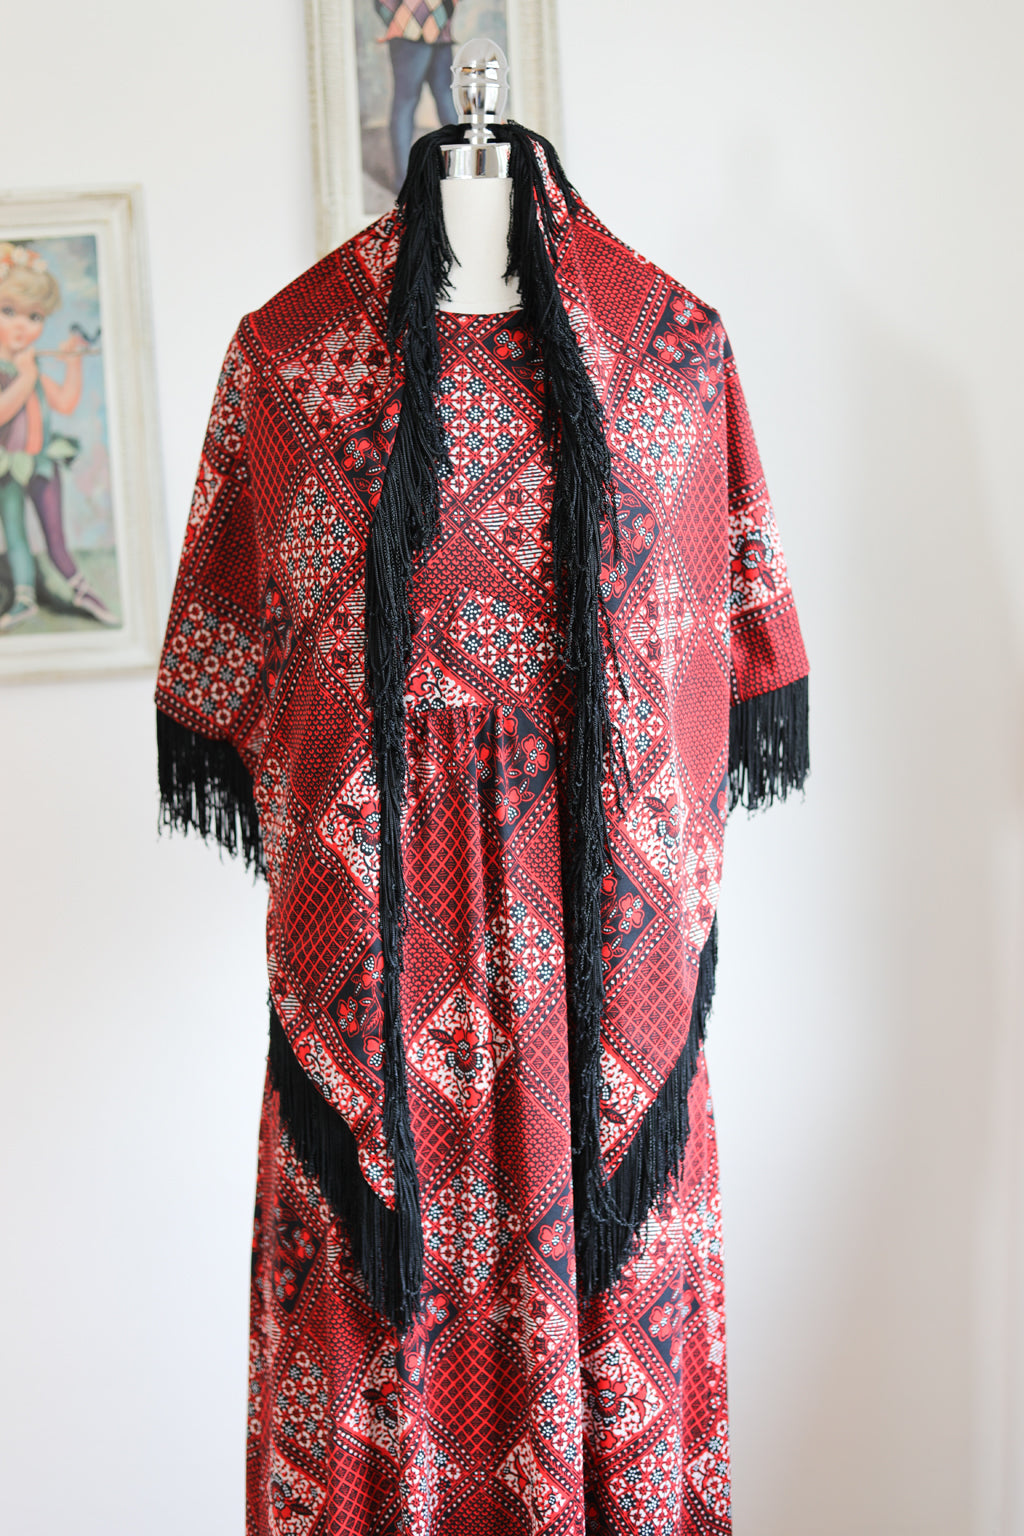 Vintage 1970s Dress + Fringed Shawl - FIERCE Lipstick Red Black Patchwork Maxi Gown w Caged Racerback + Matching Fringe Wrap! Size XS to S